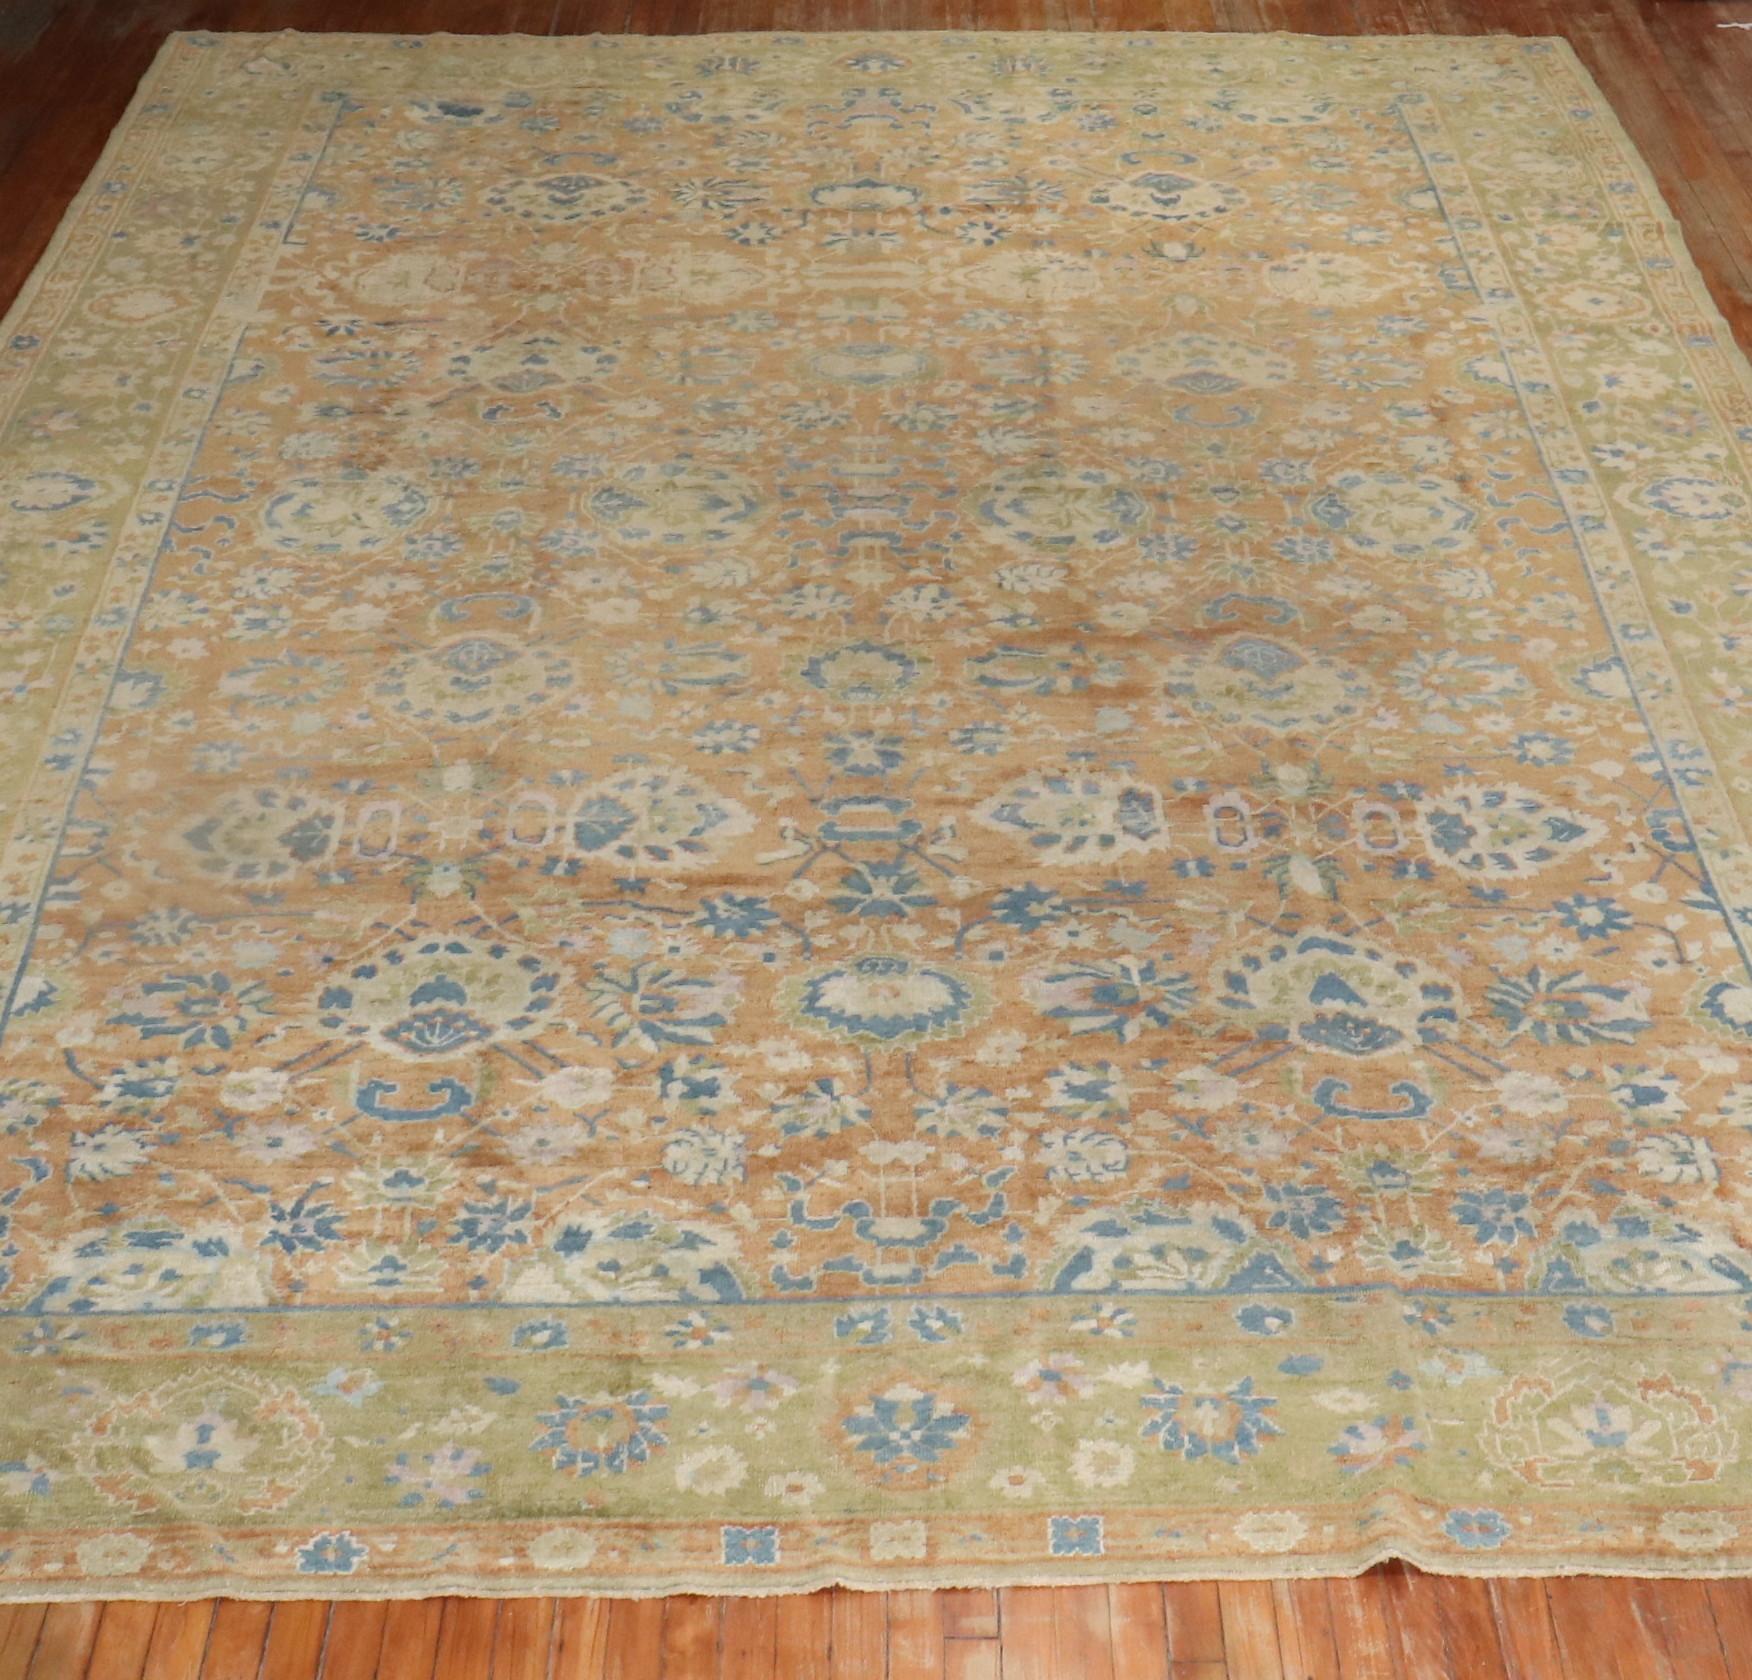 An early 20th-century oversize decorative Chinese rug with an all-over design on a faded peach field accents in brown, light blue, green, ivory. The design seems to be derived from late 19th century and early 20th century Persian Tabriz